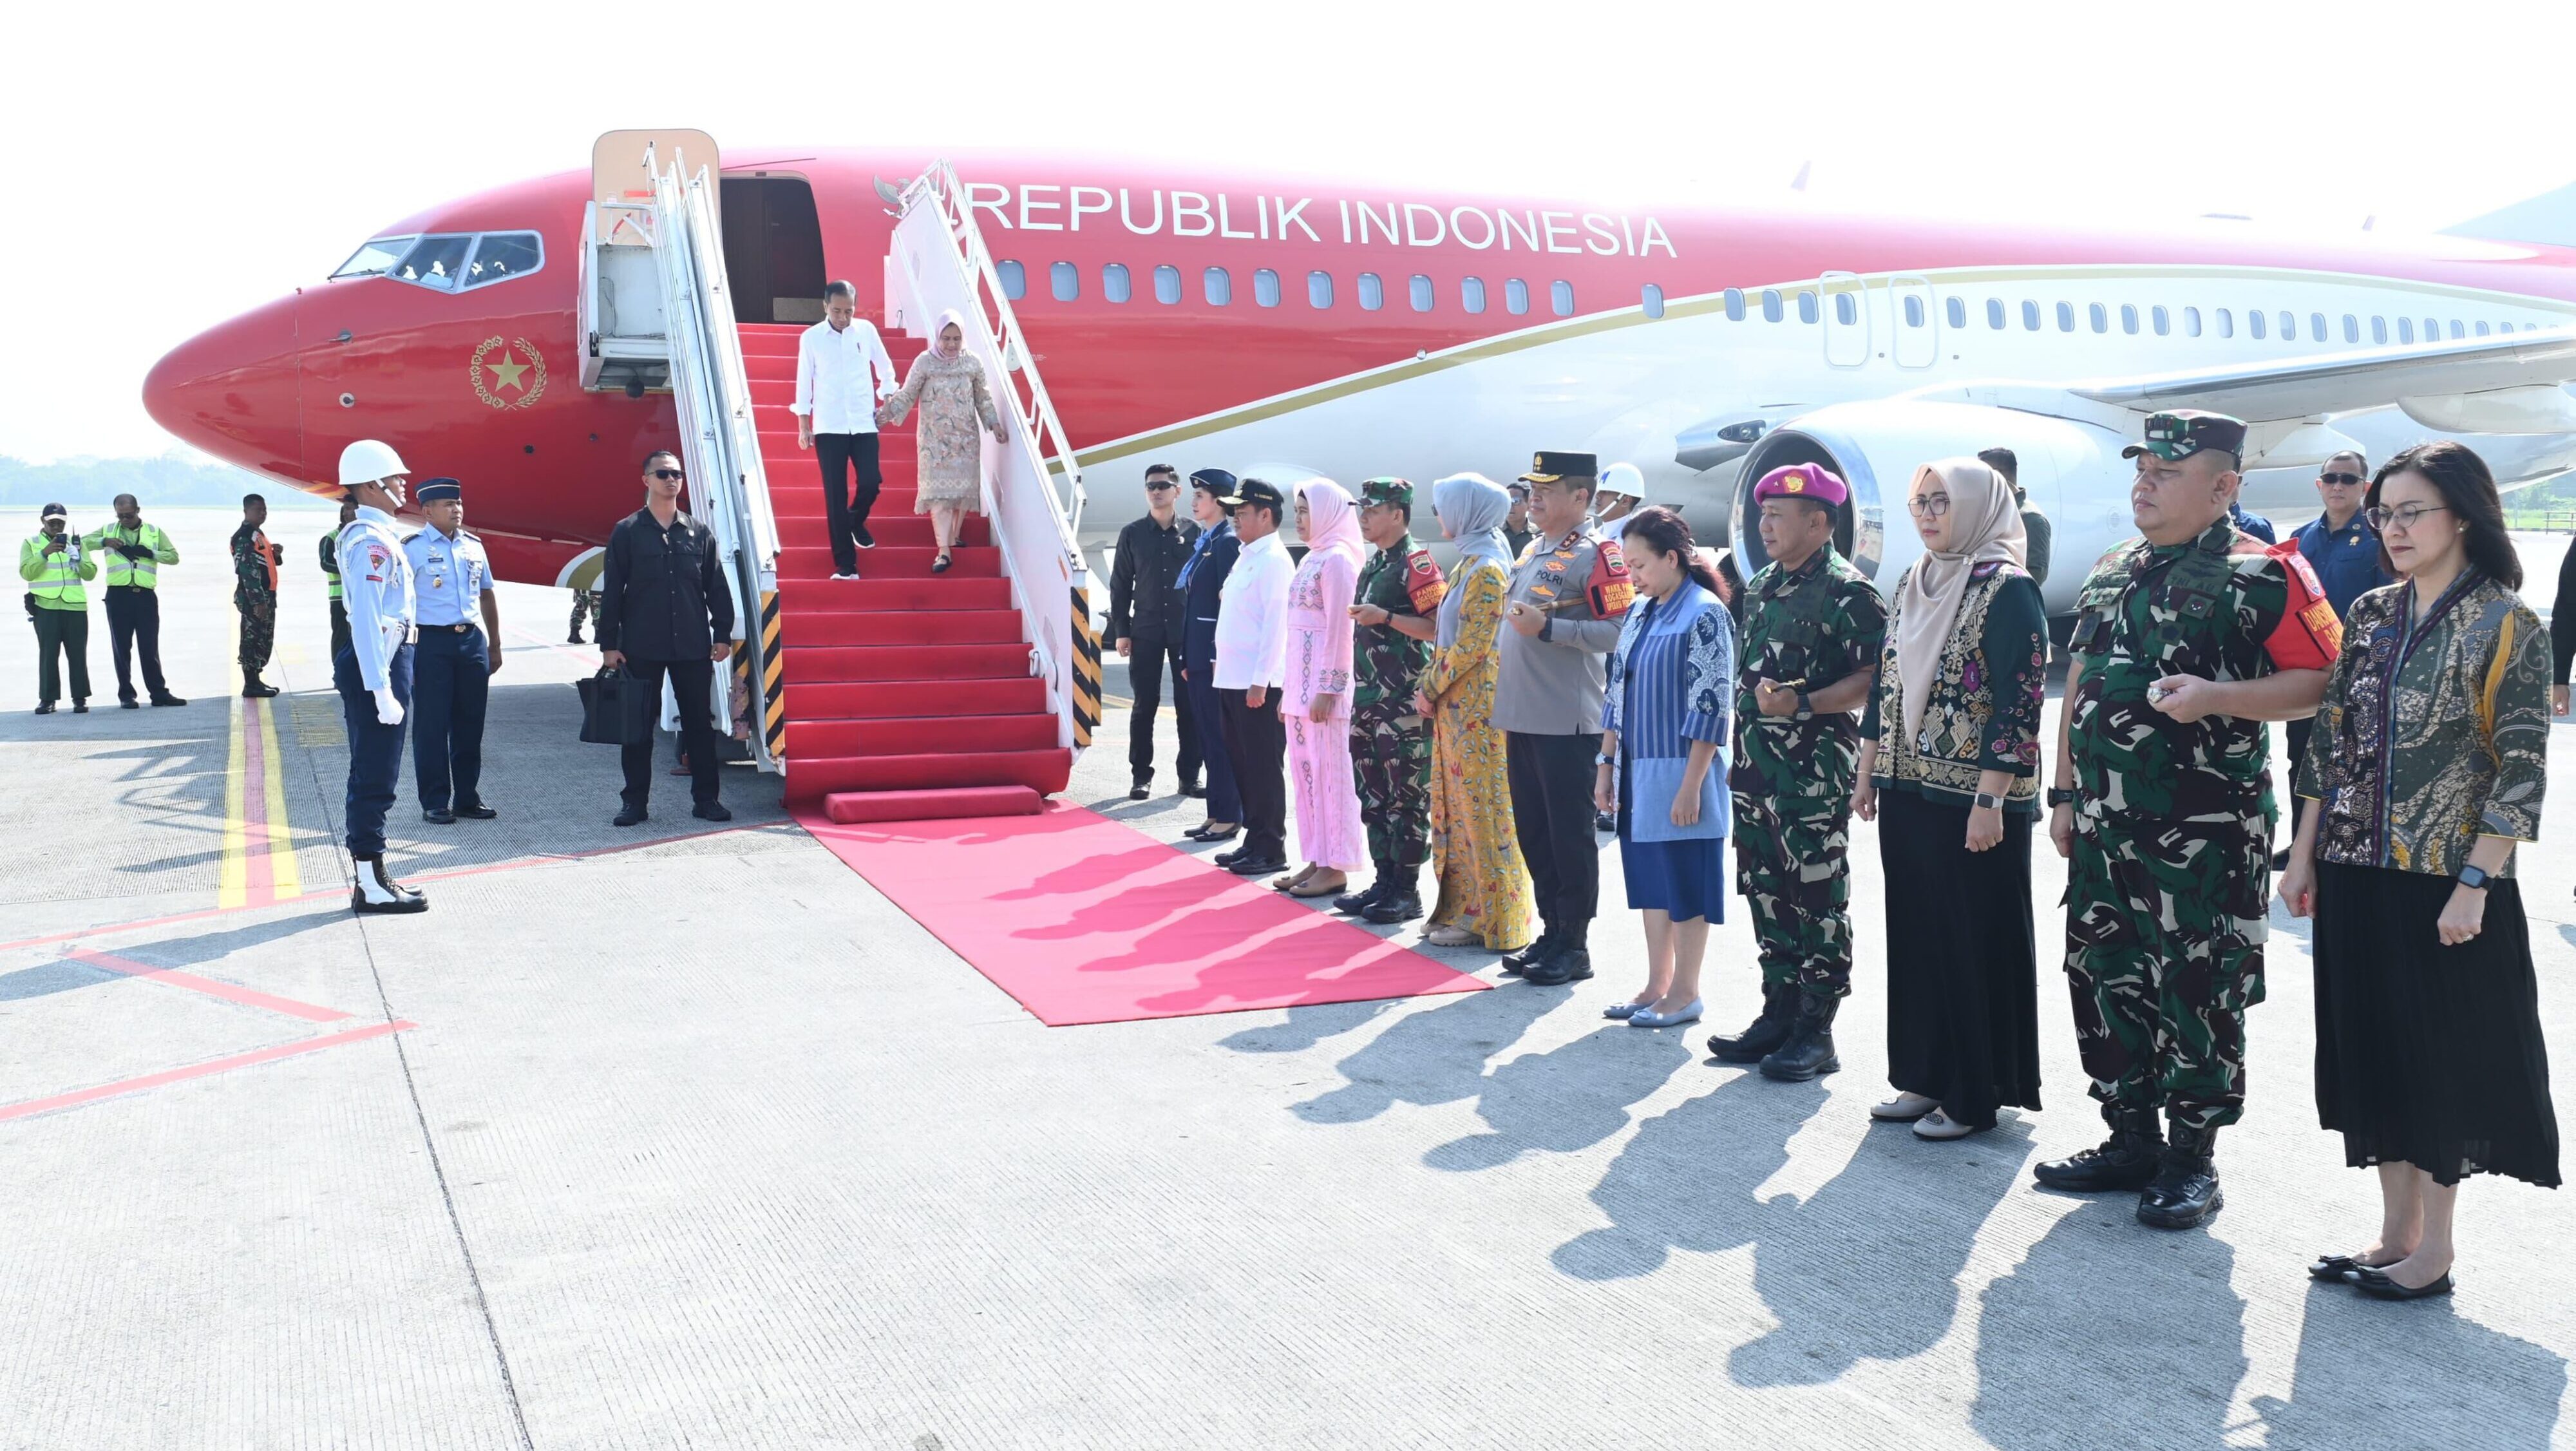 Visiting North Sumatra, President to inaugurate red edible oil pilot plant